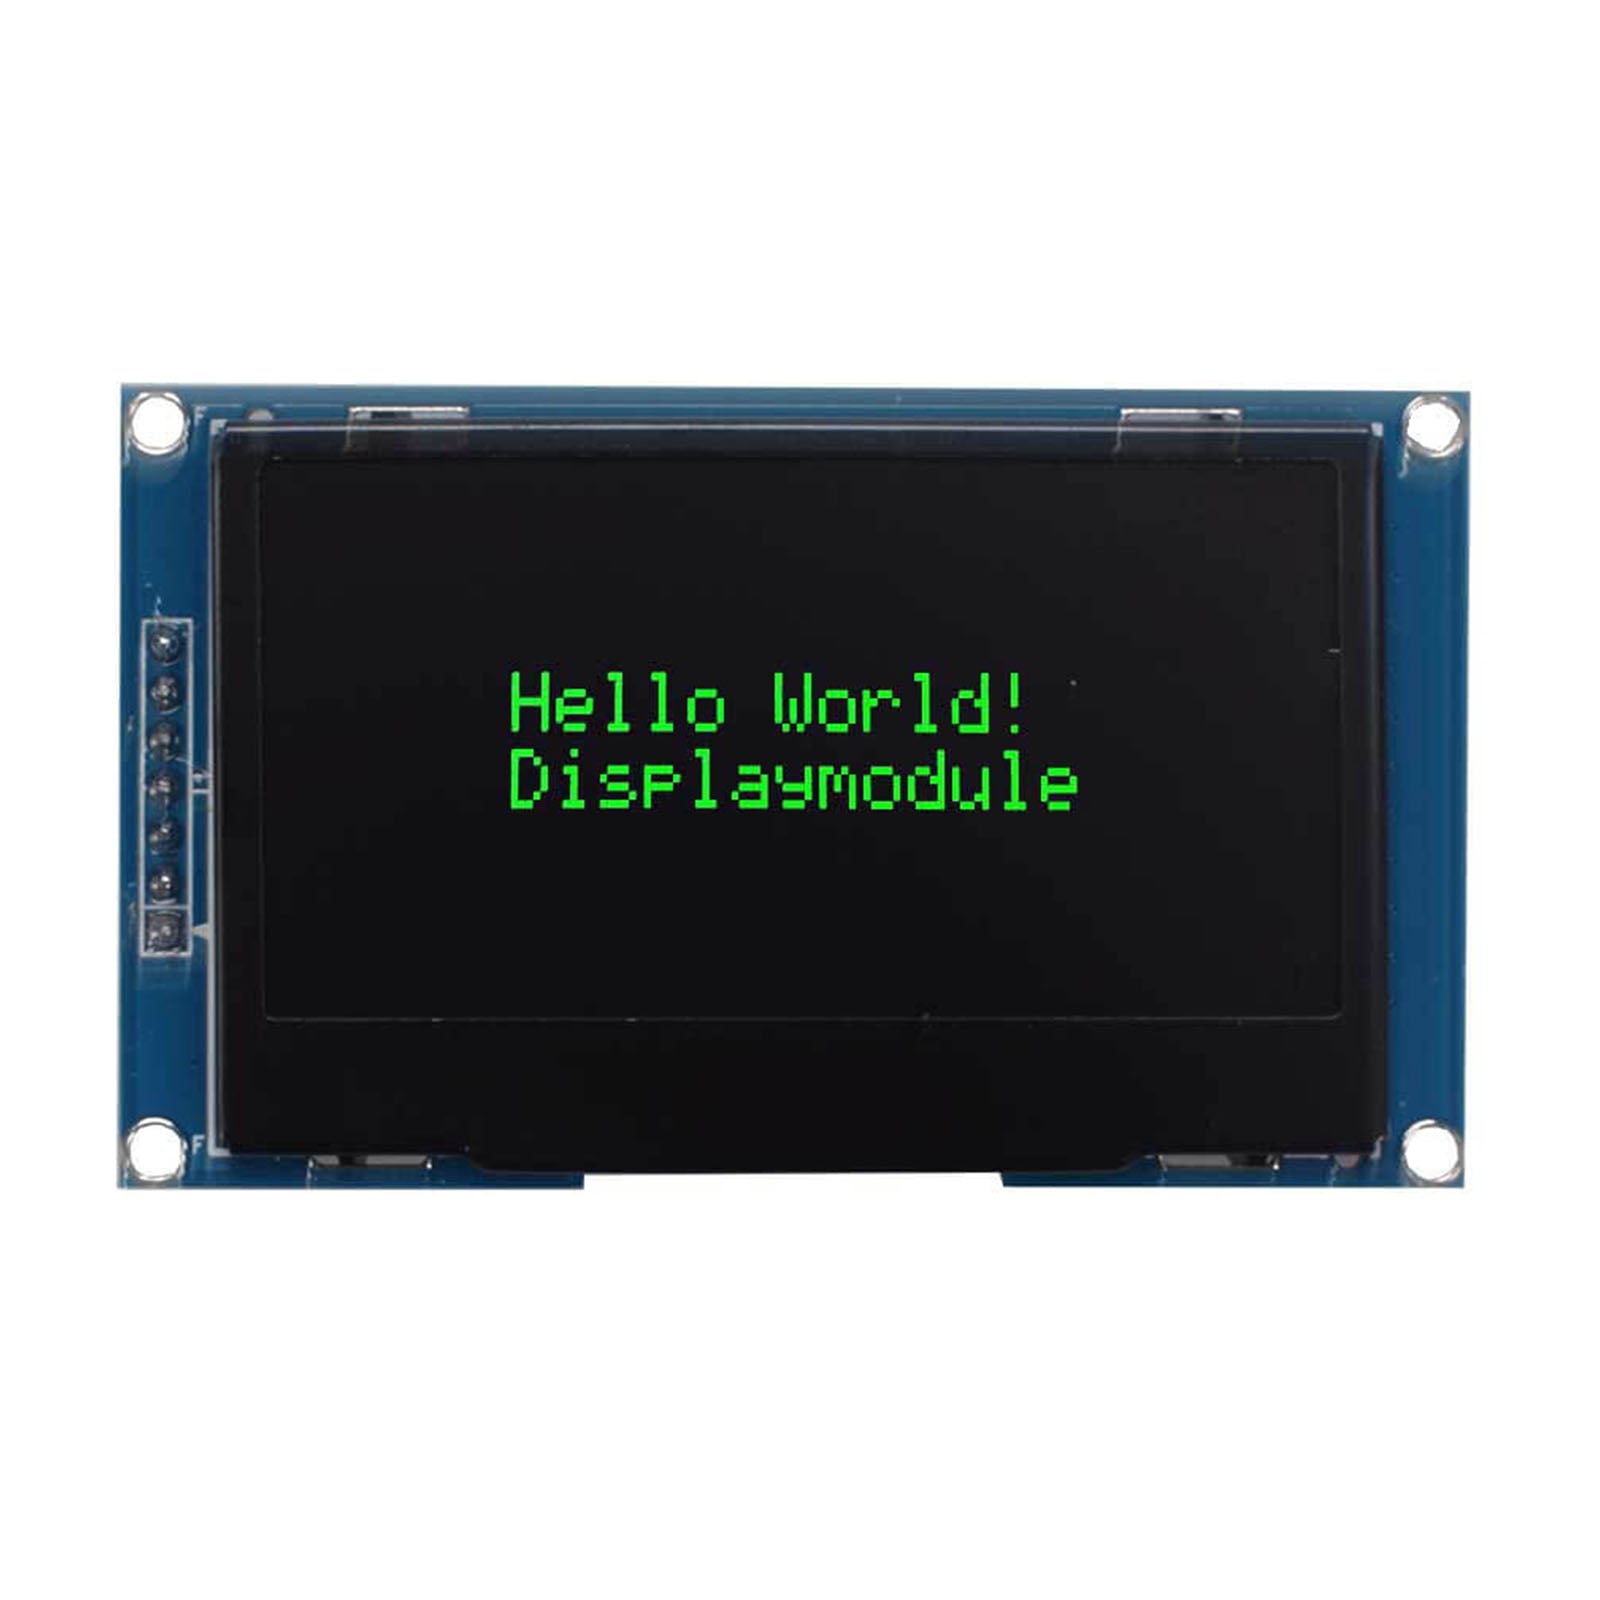 2.4-inch OLED display screen showing the green characters 'Hello World! DISPLAYMODULE'